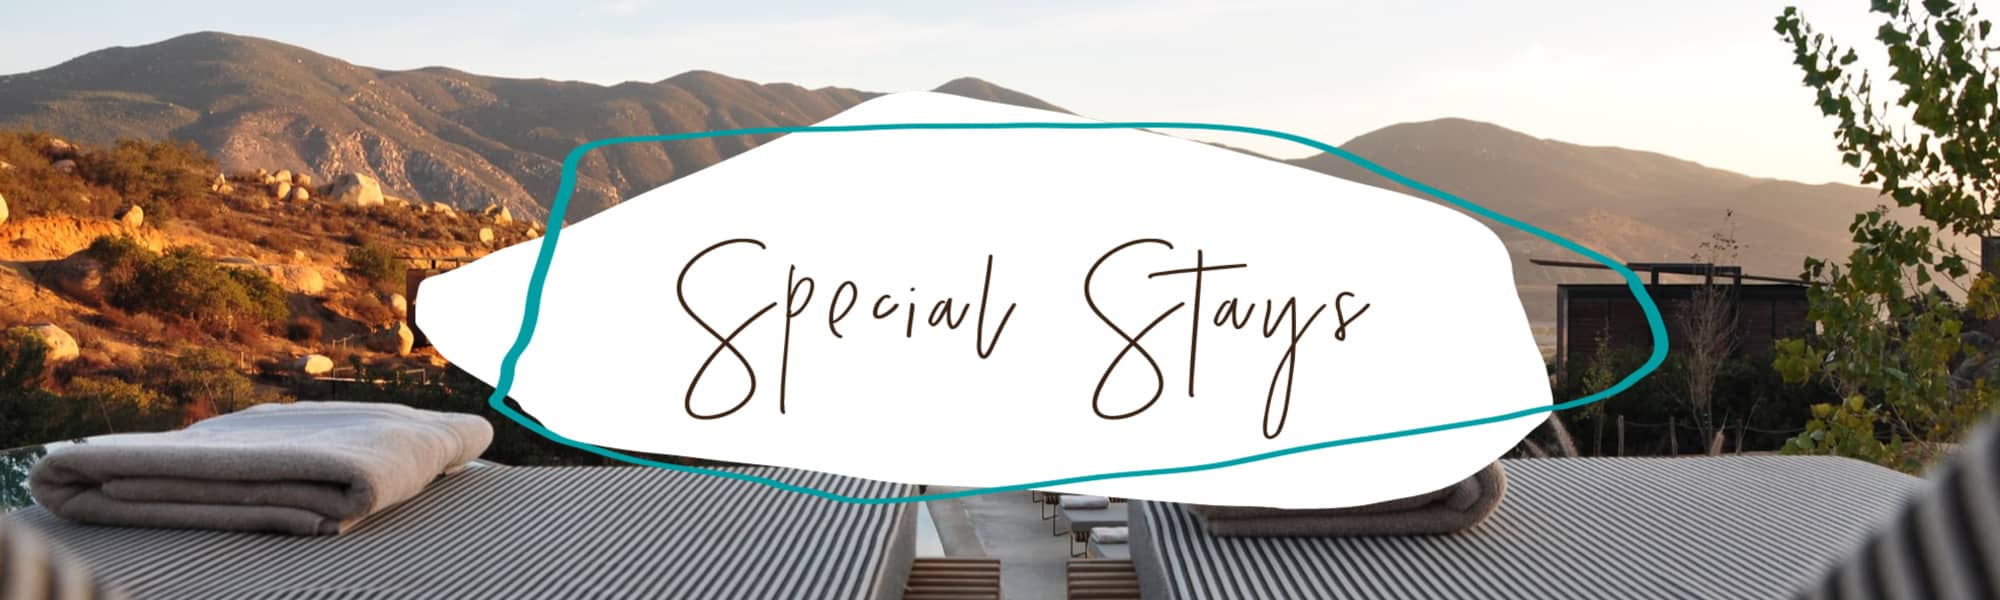 Special Stays